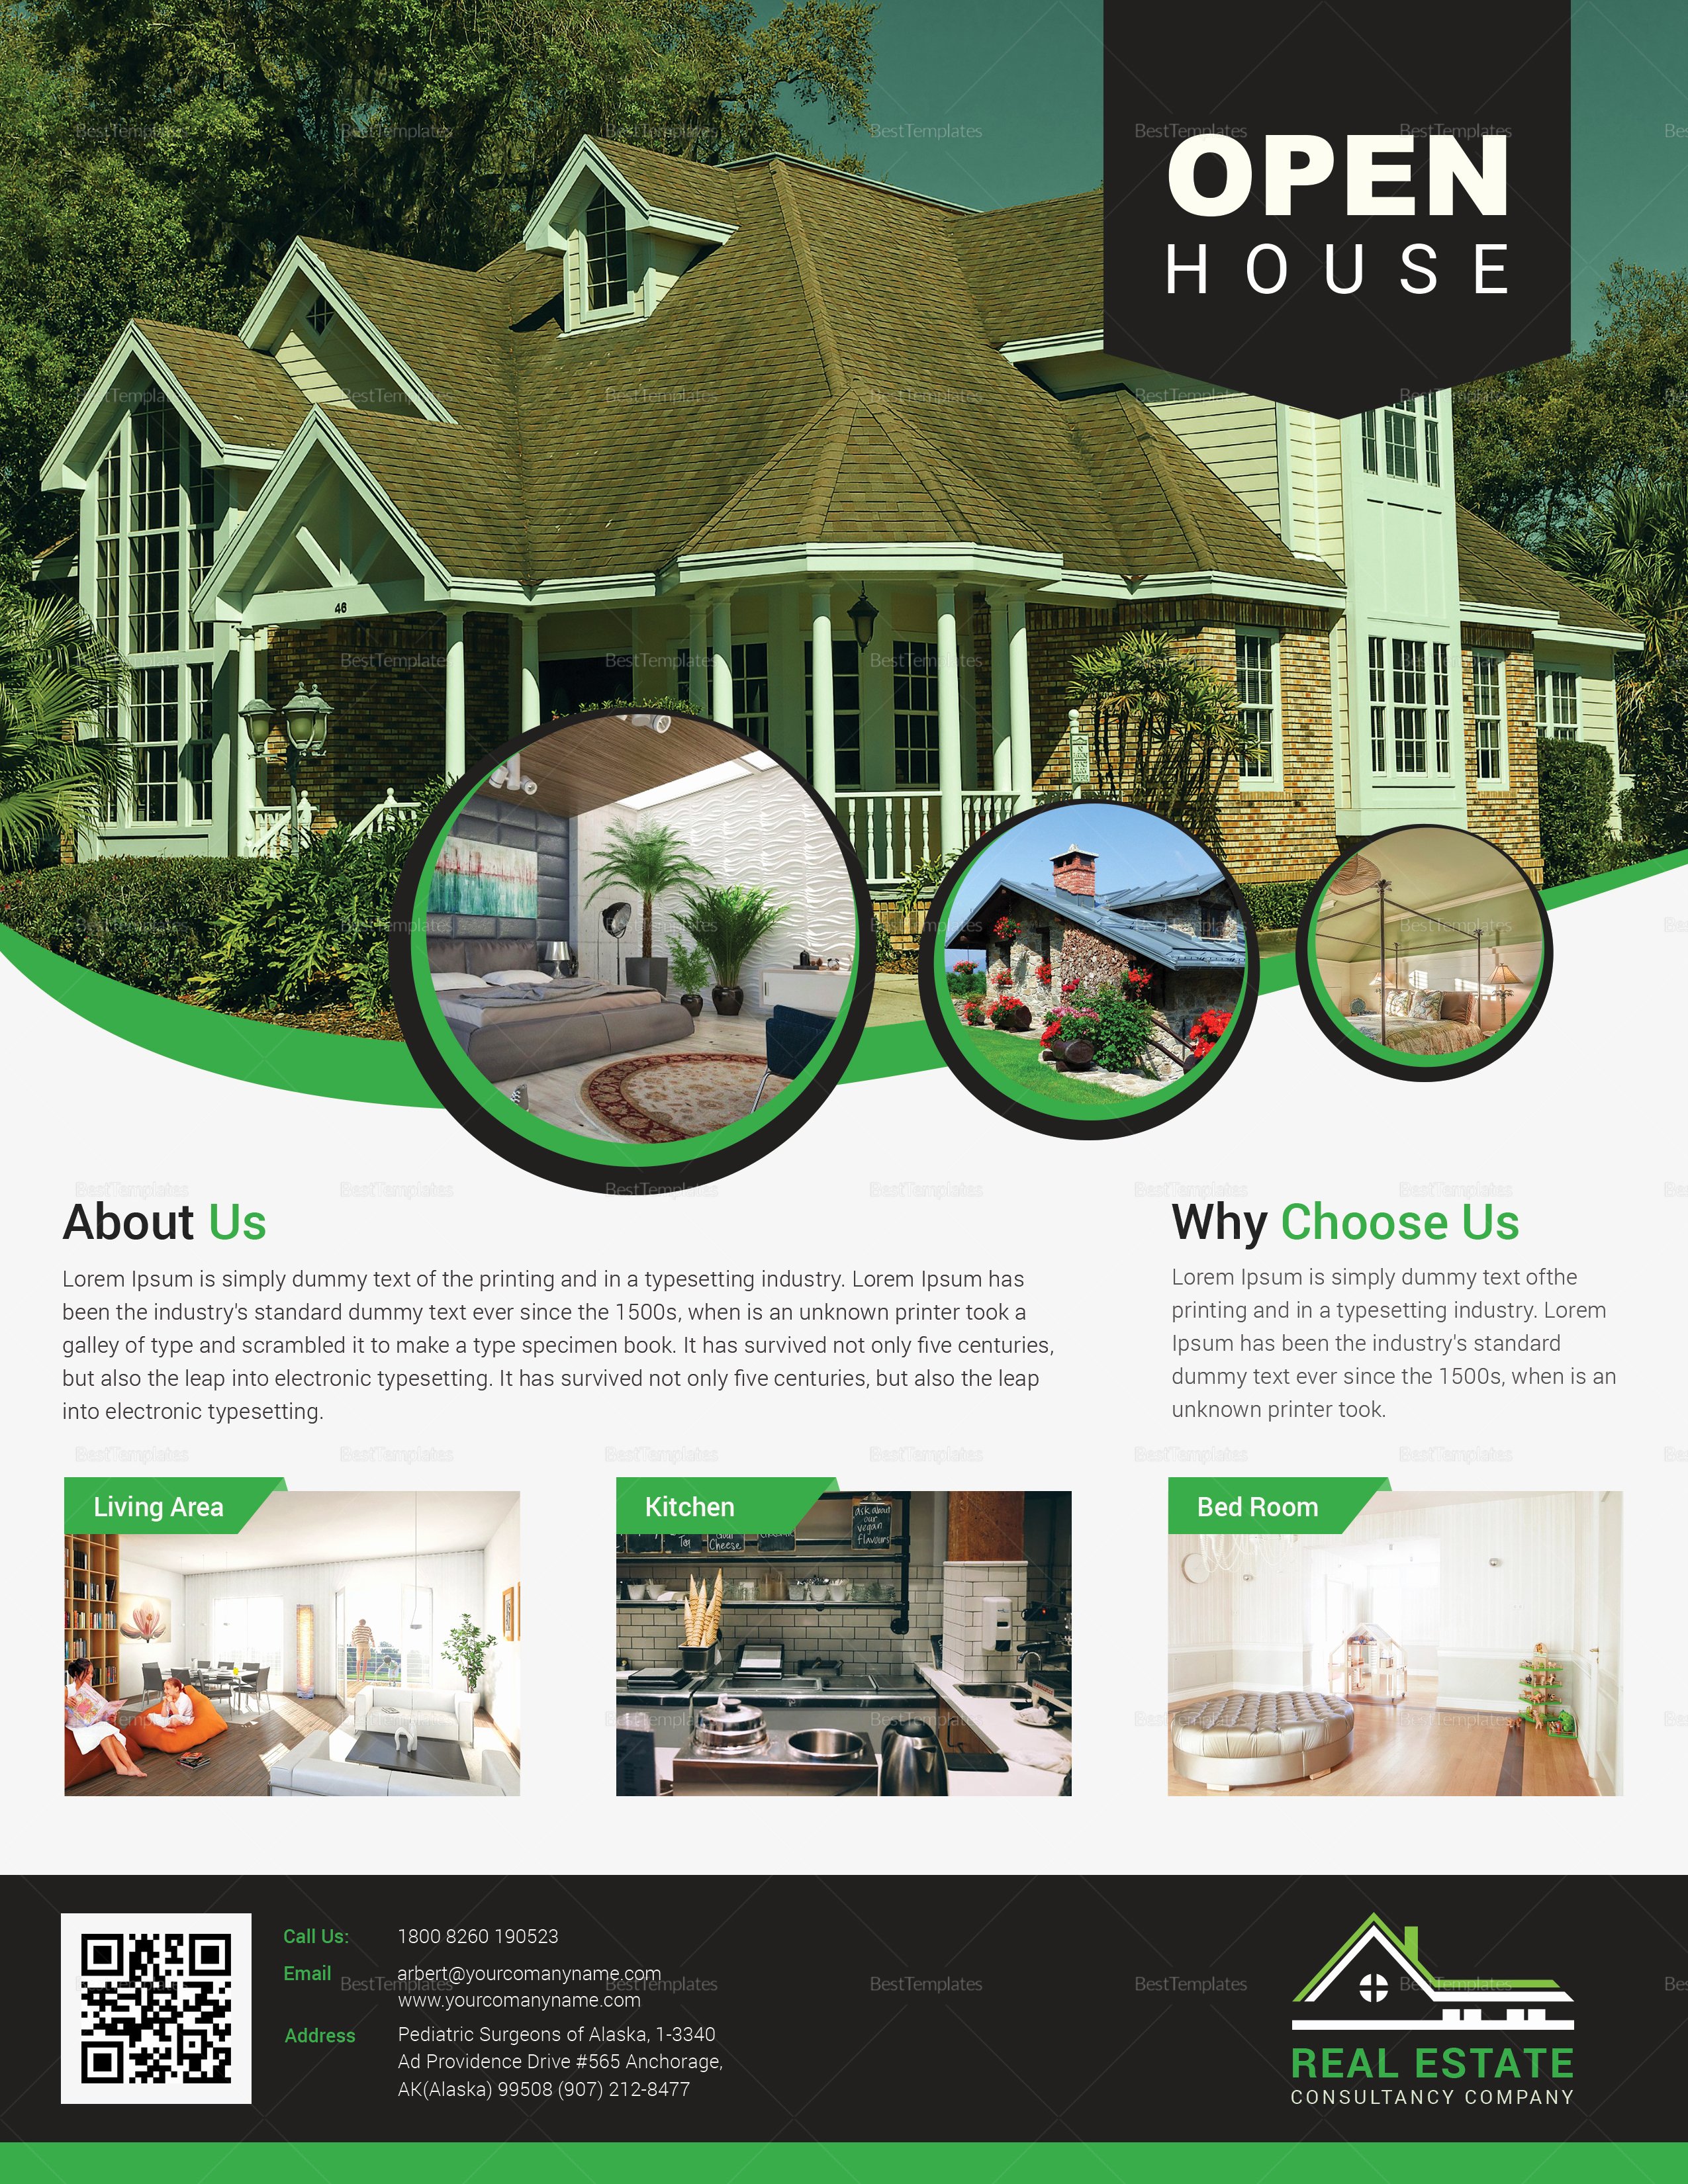 Real Estate Open House Template New Real Estate Open House Flyer Design Template In Word Psd